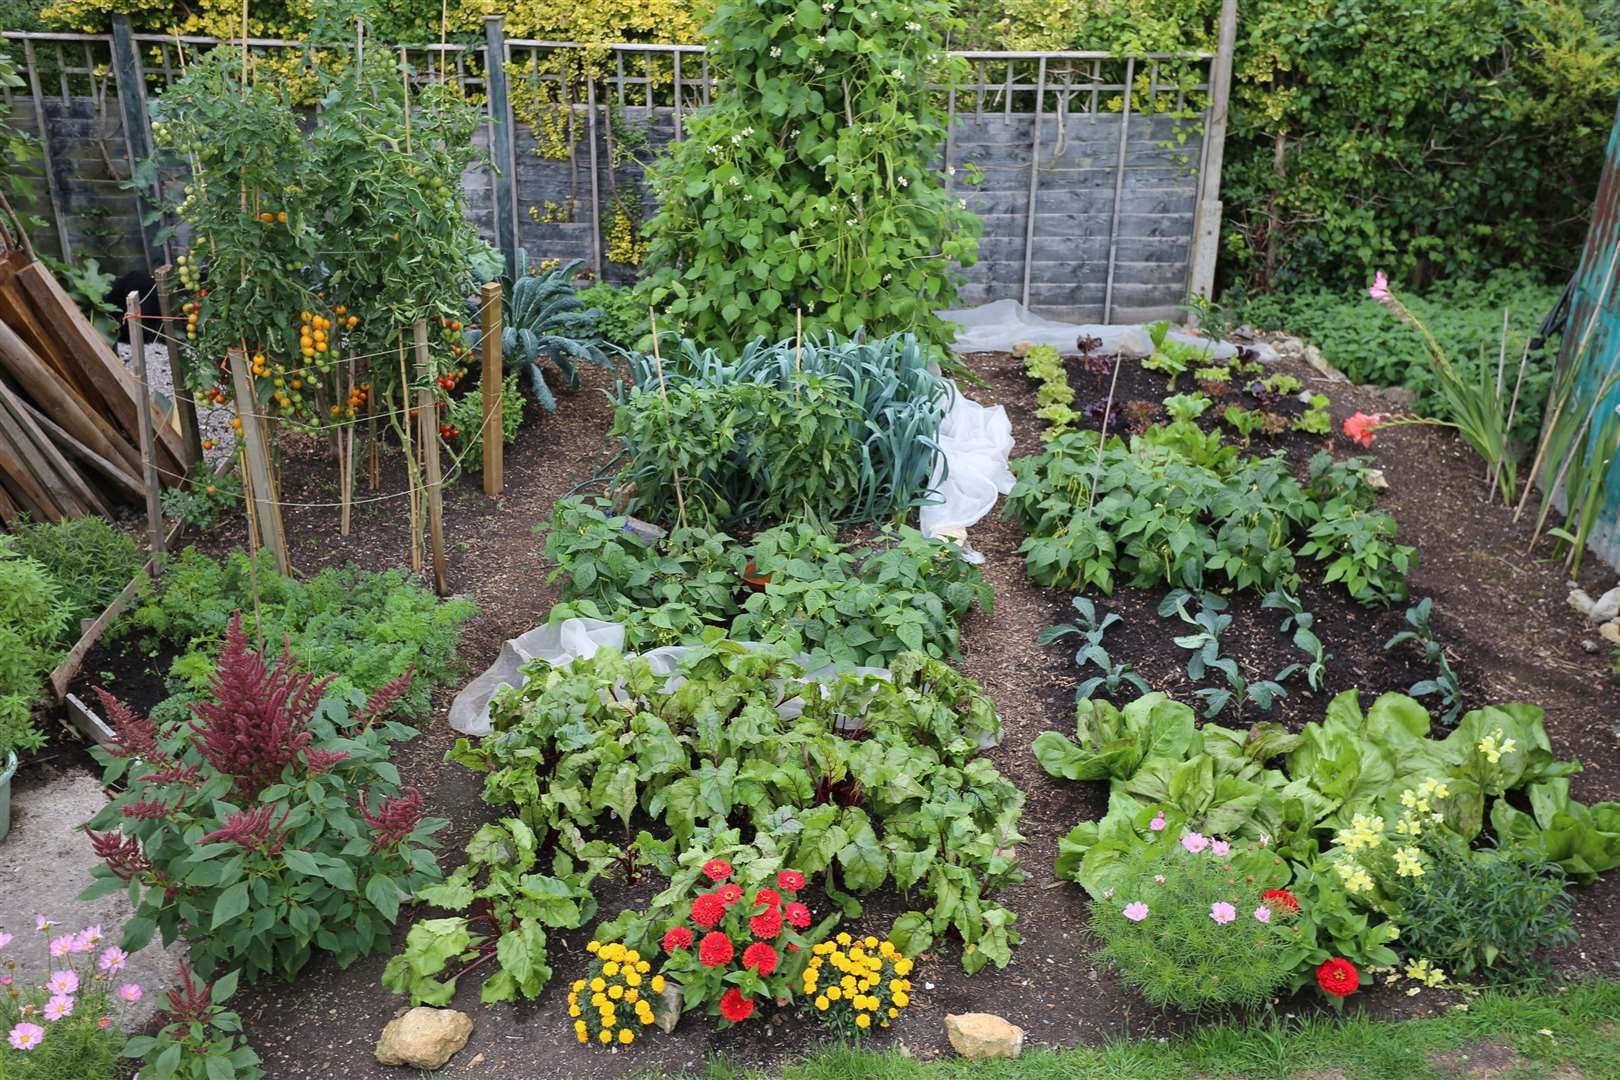 Many plants and vegetables can be planted closer together than suggested. Picture: Charles Dowding/PA